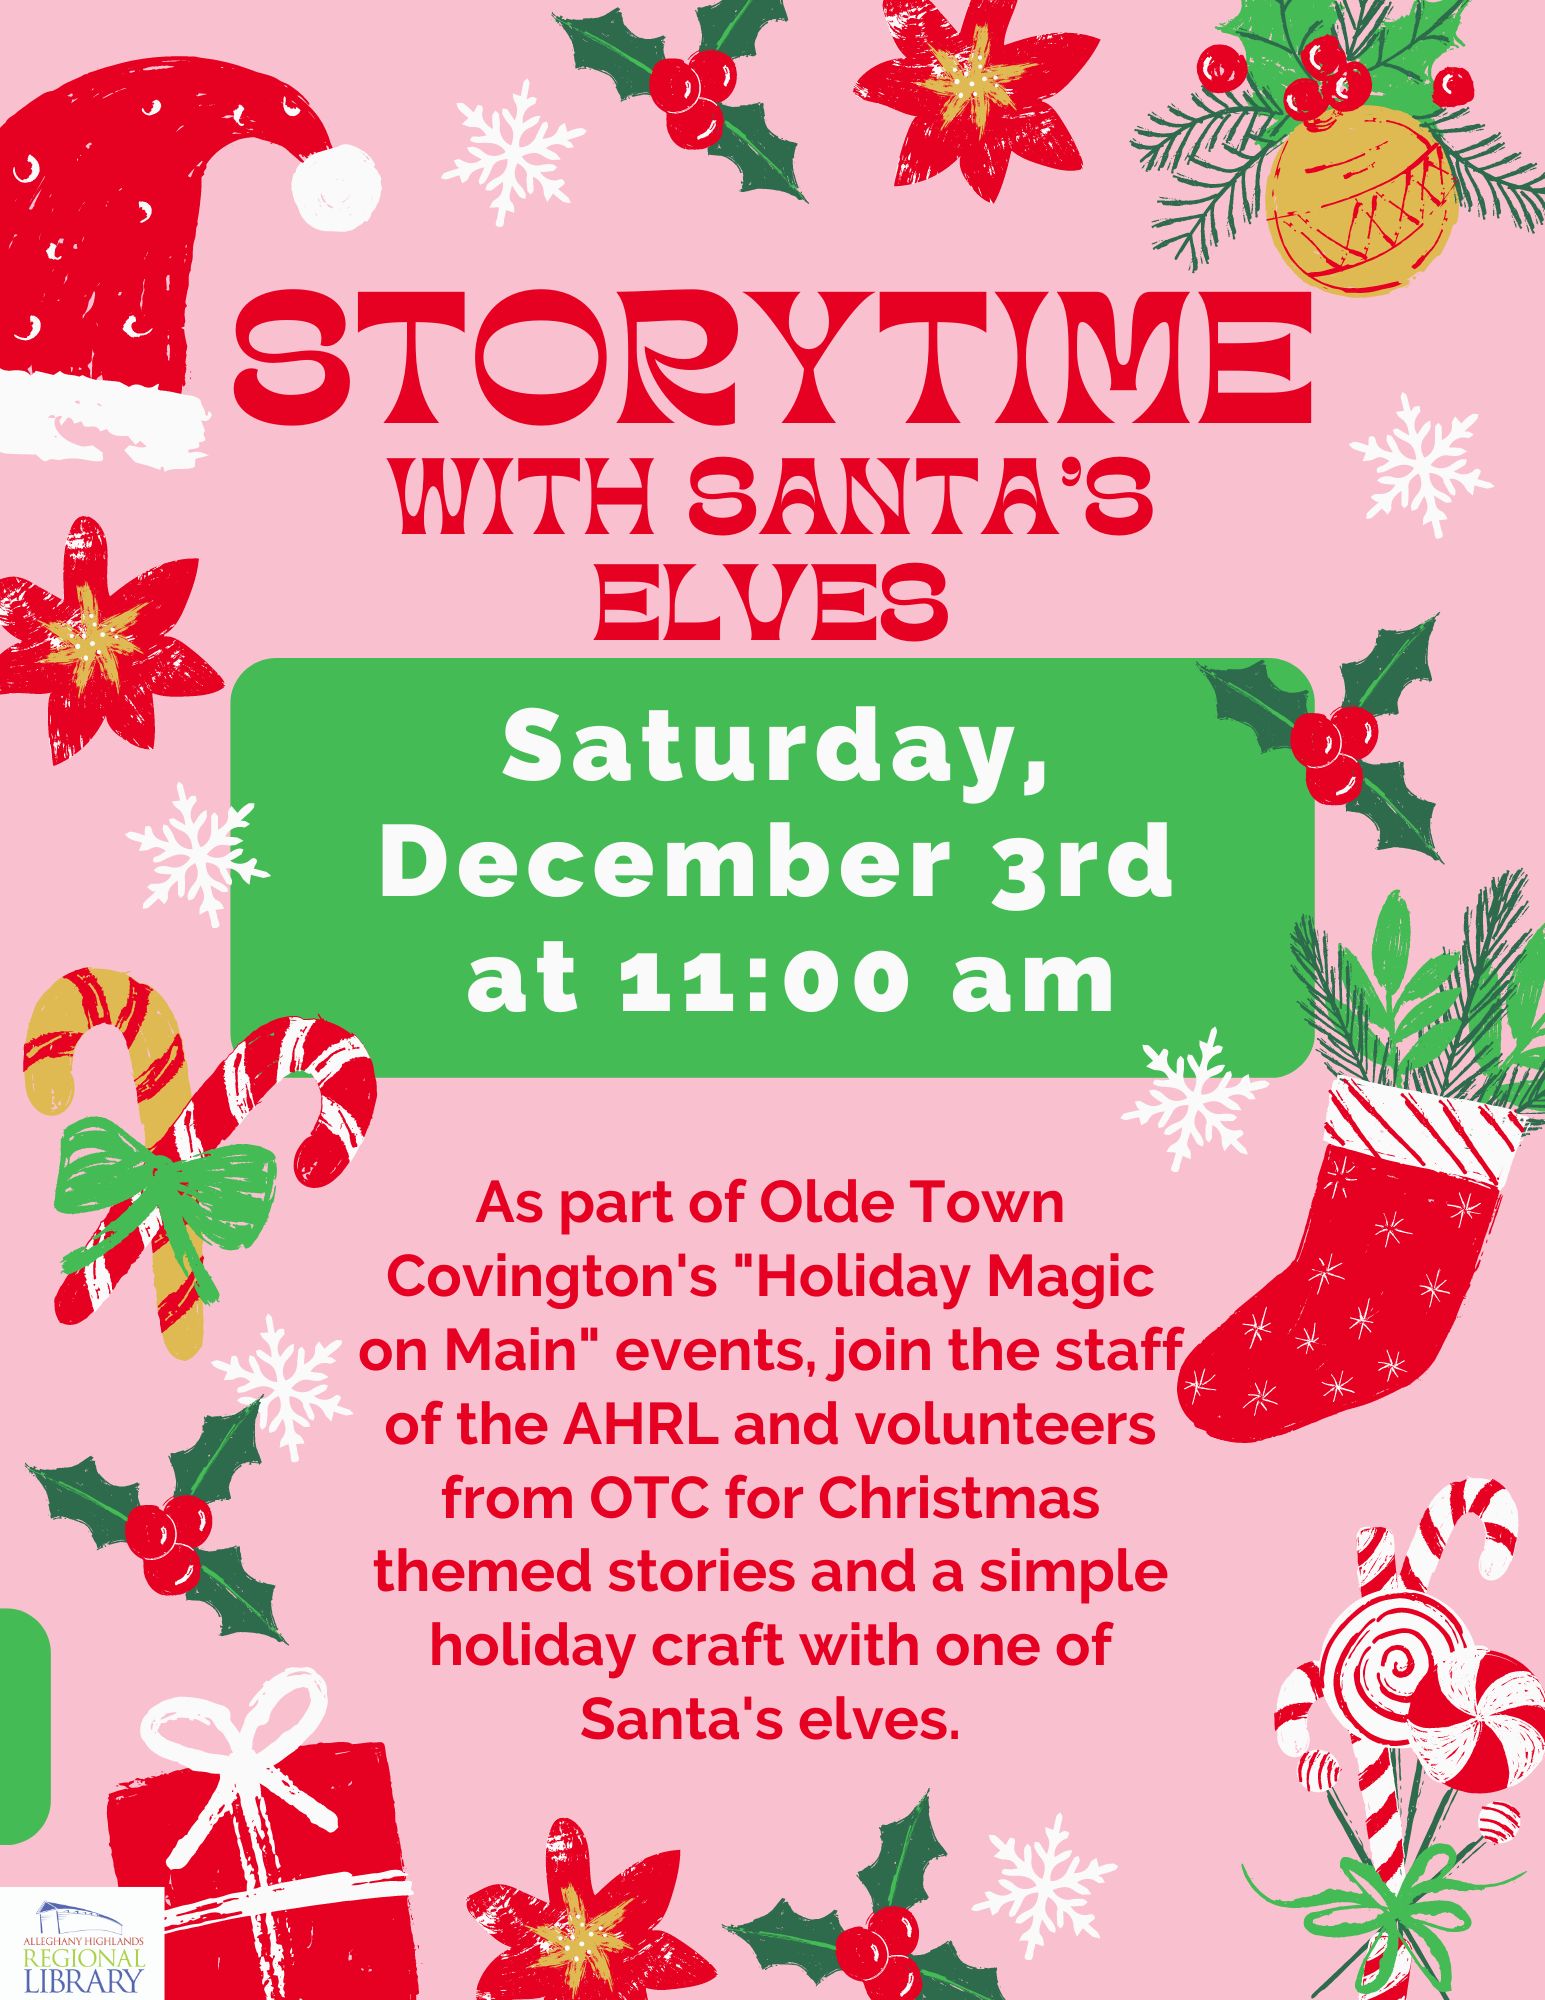 Storytime with Santa's Elves